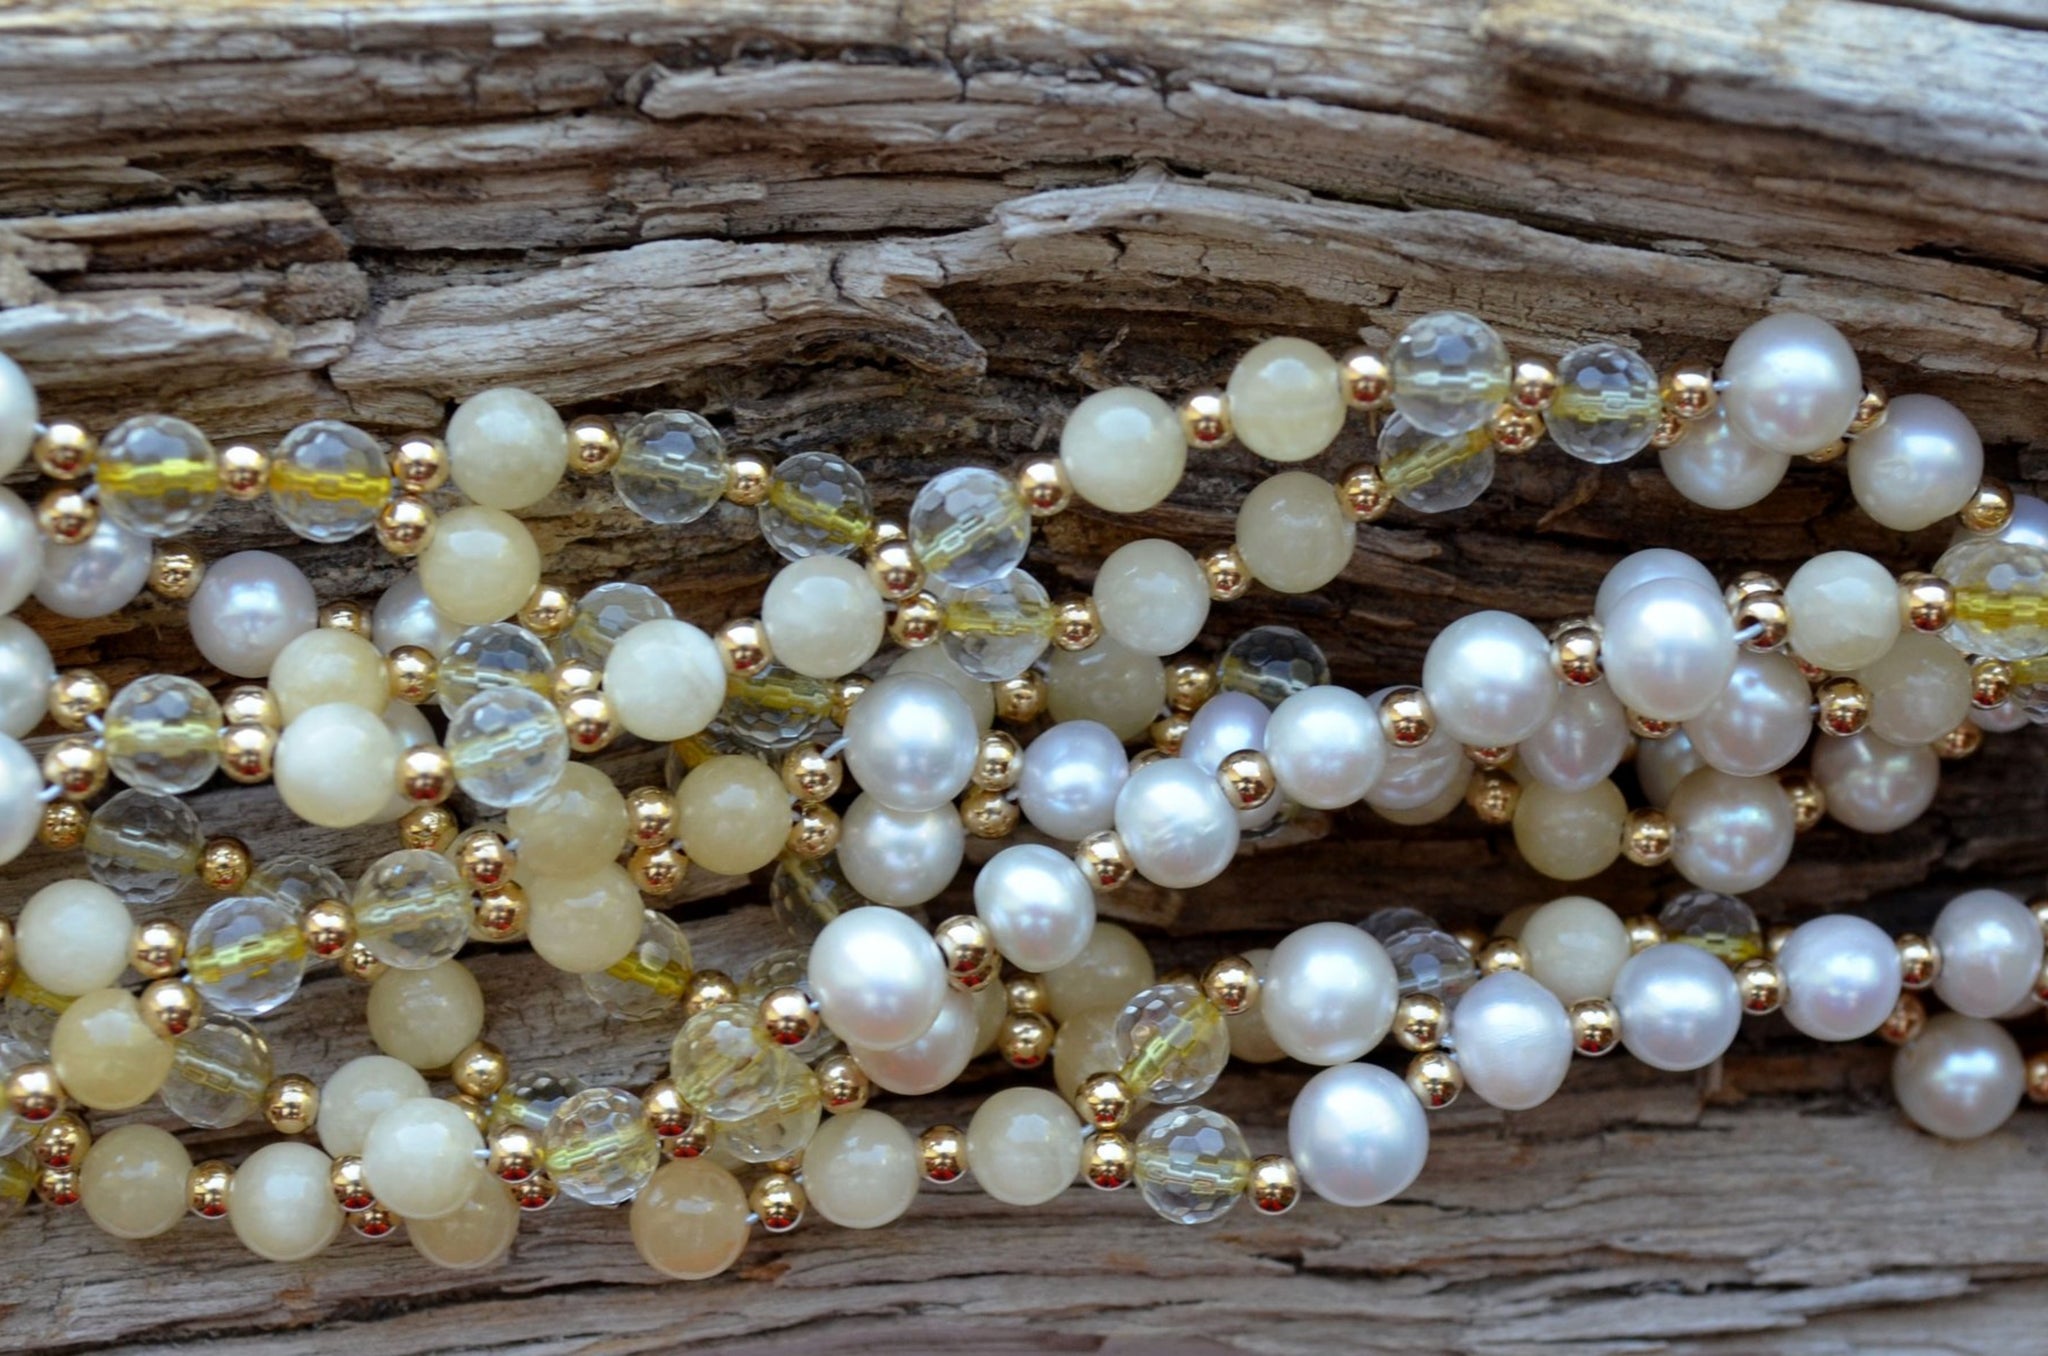 6mm Citrine Faceted, Calcite, Quartz Crystal Faceted, Pearl and Gold-Filled